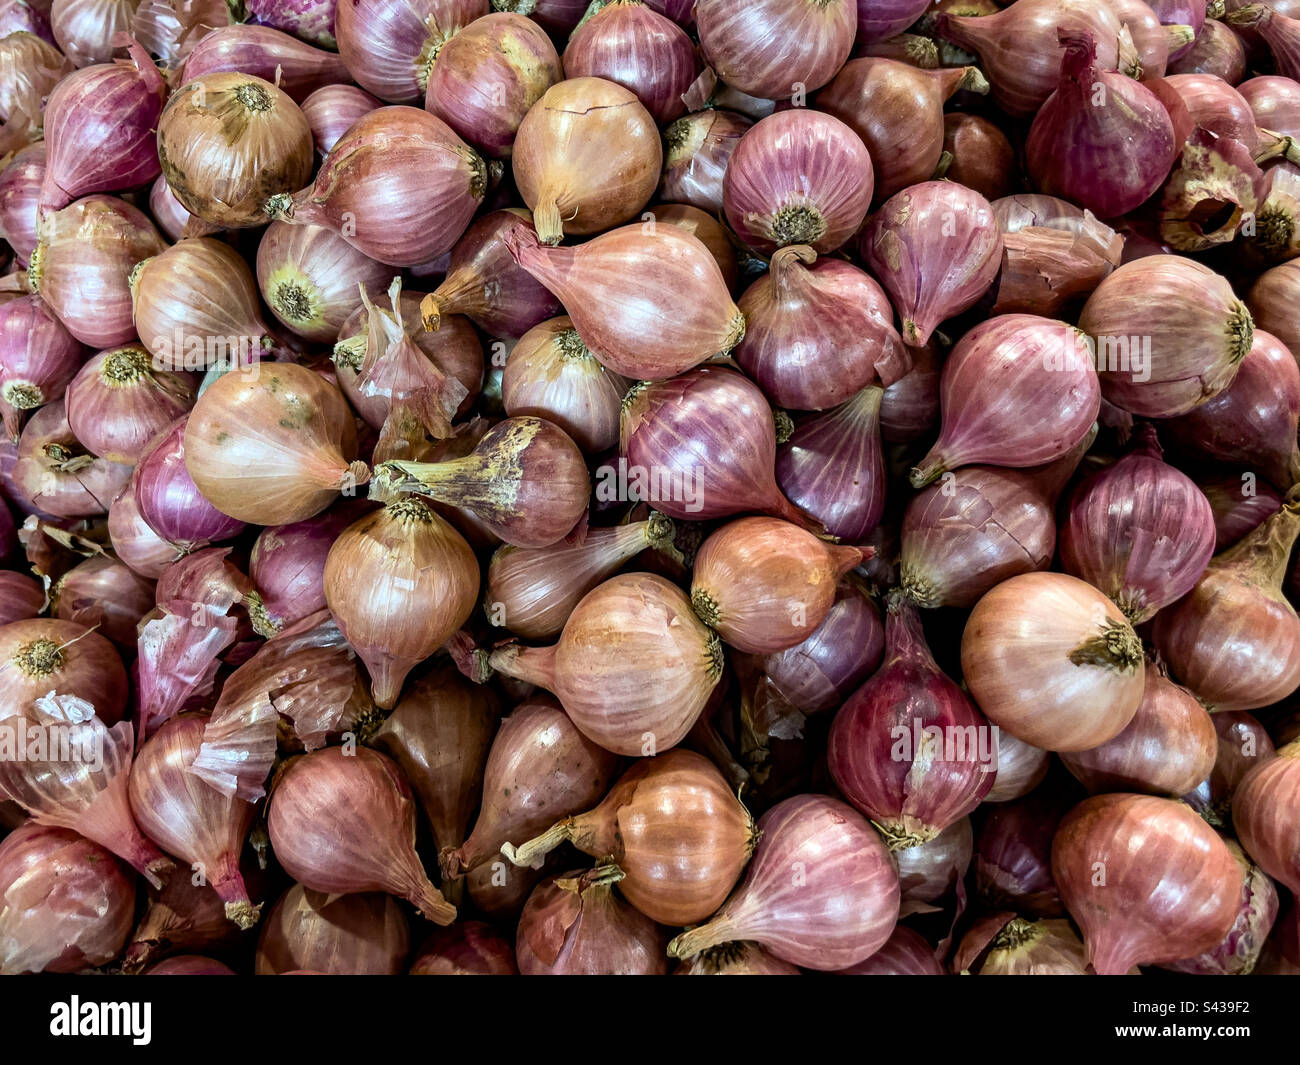 Red onions for sale, Central Market, Port Louis, Mauritius Stock Photo